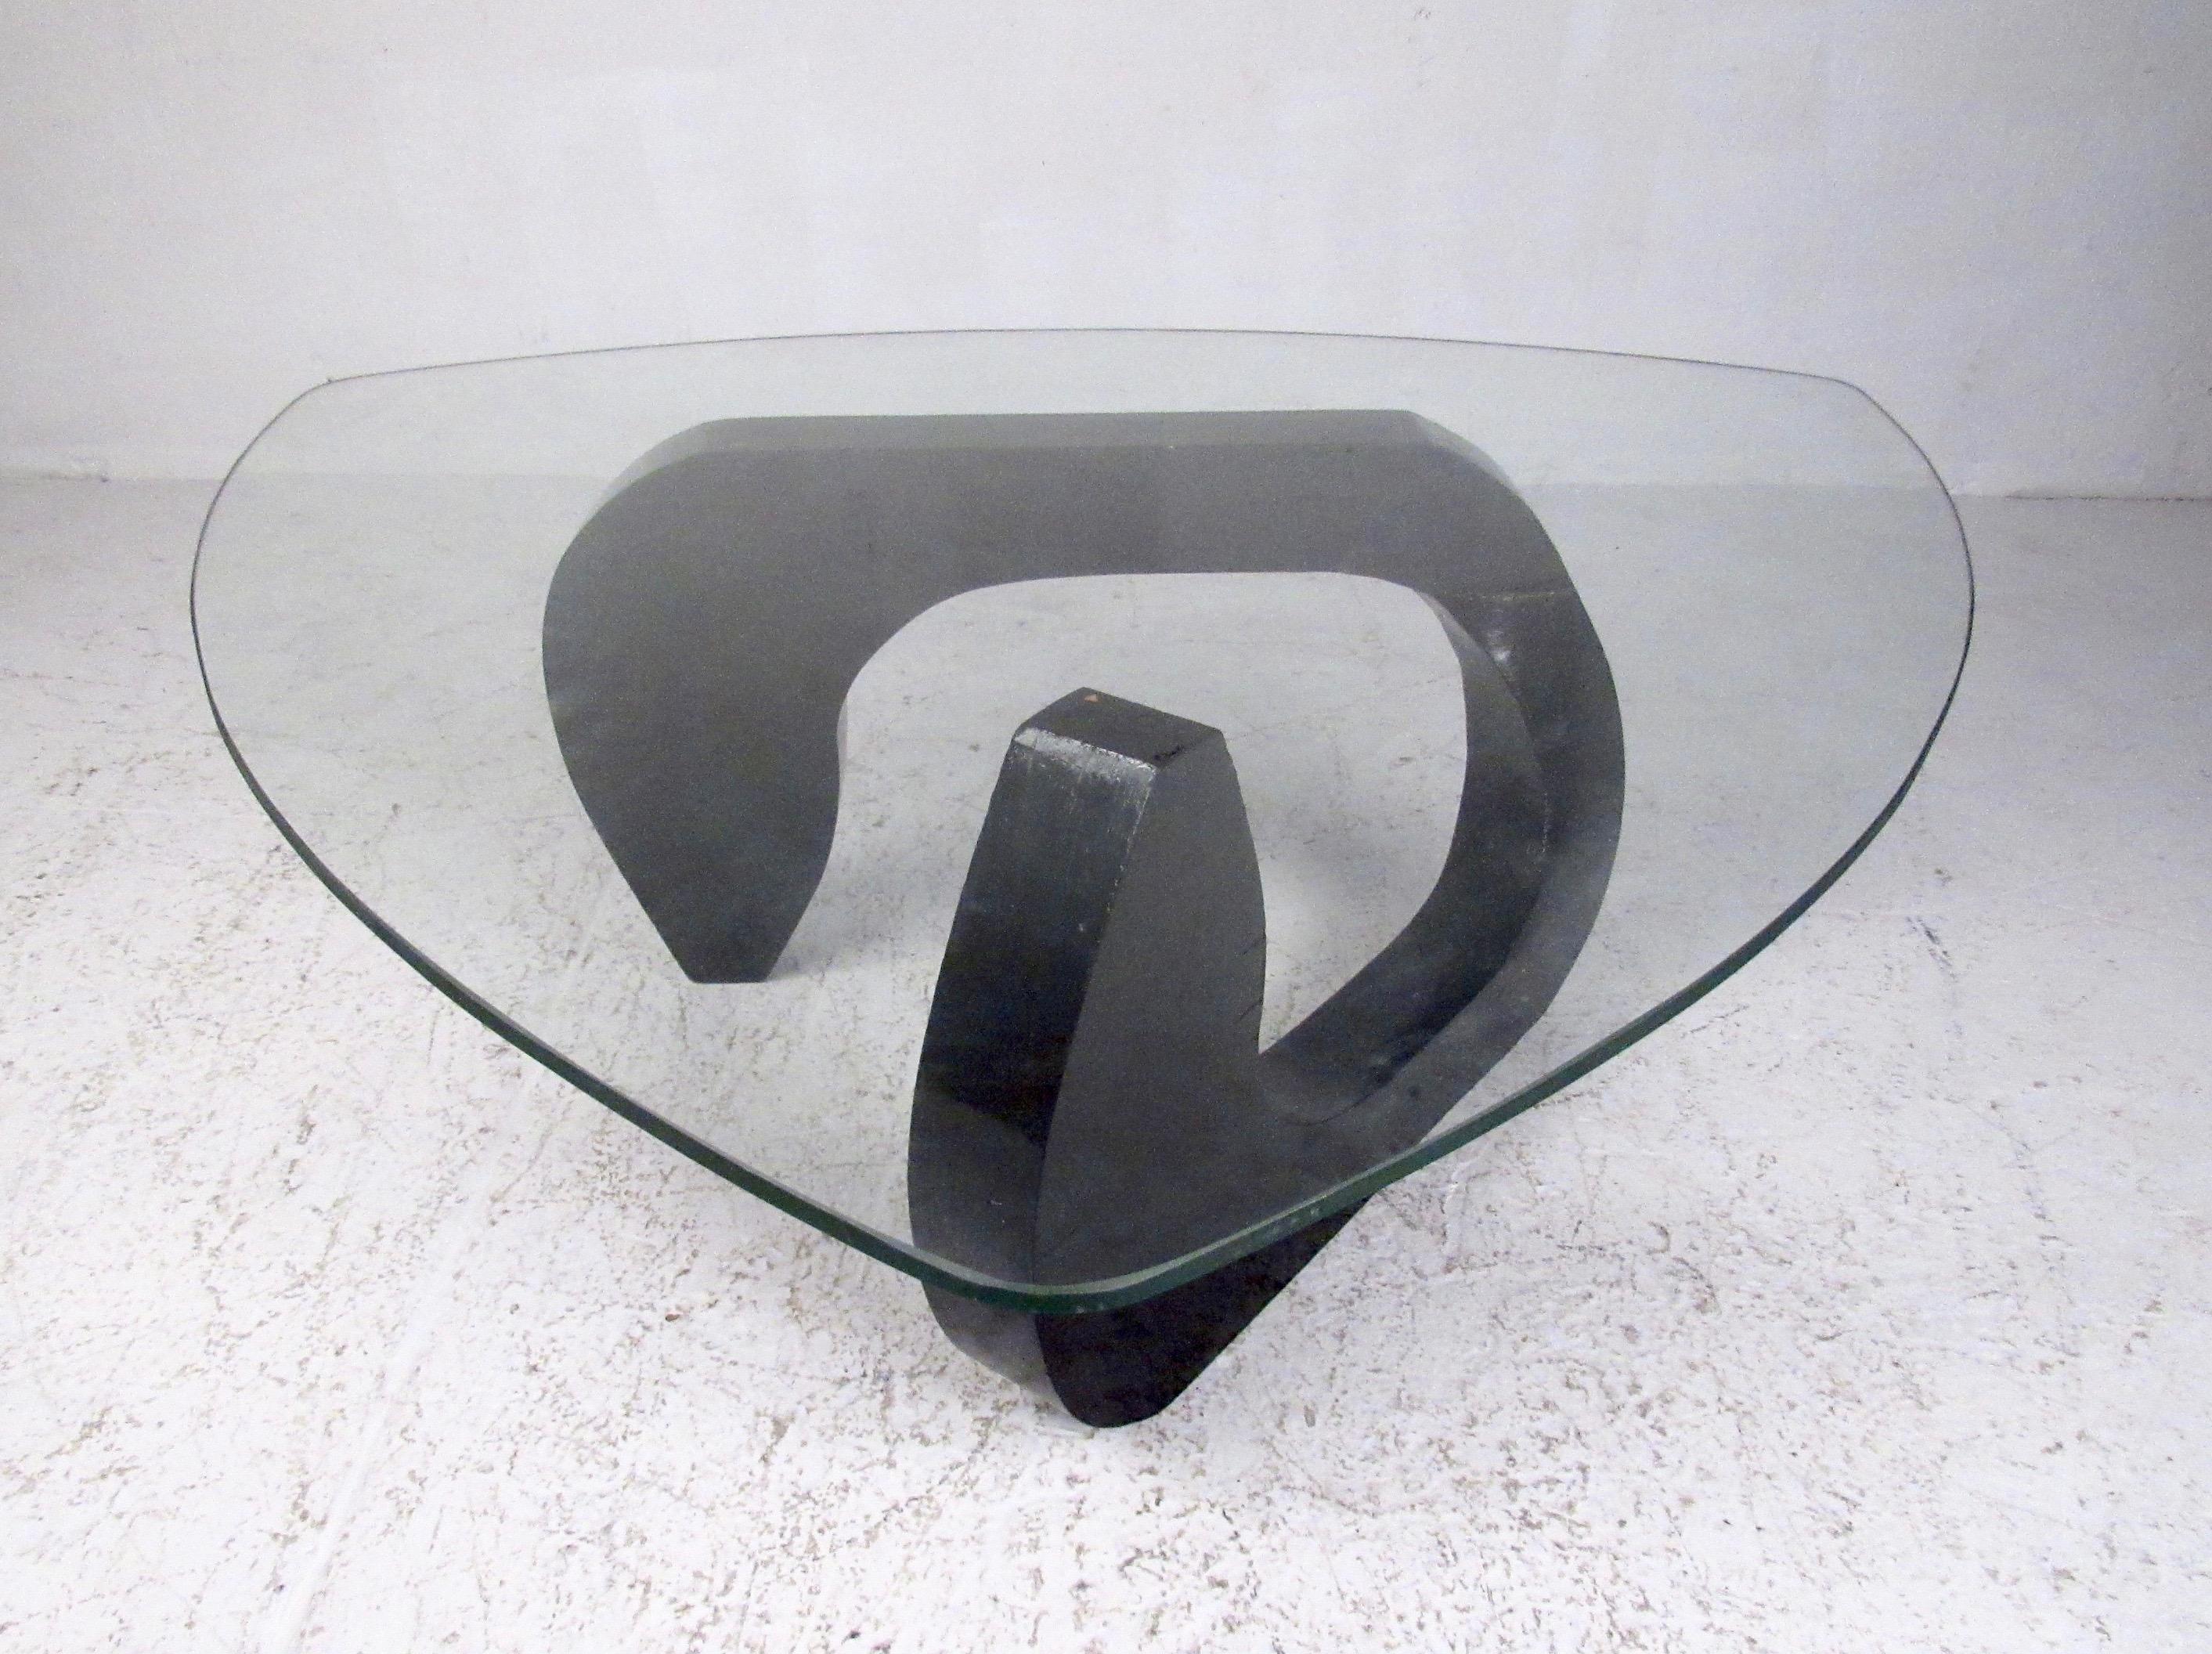 Vintage modern coffee table features shapely wood base topped with triangular glass top makes a simple yet elegant centrepiece to home or business seating arrangement. The Noguchi style of the piece adds a timeless midcentury style addition in any